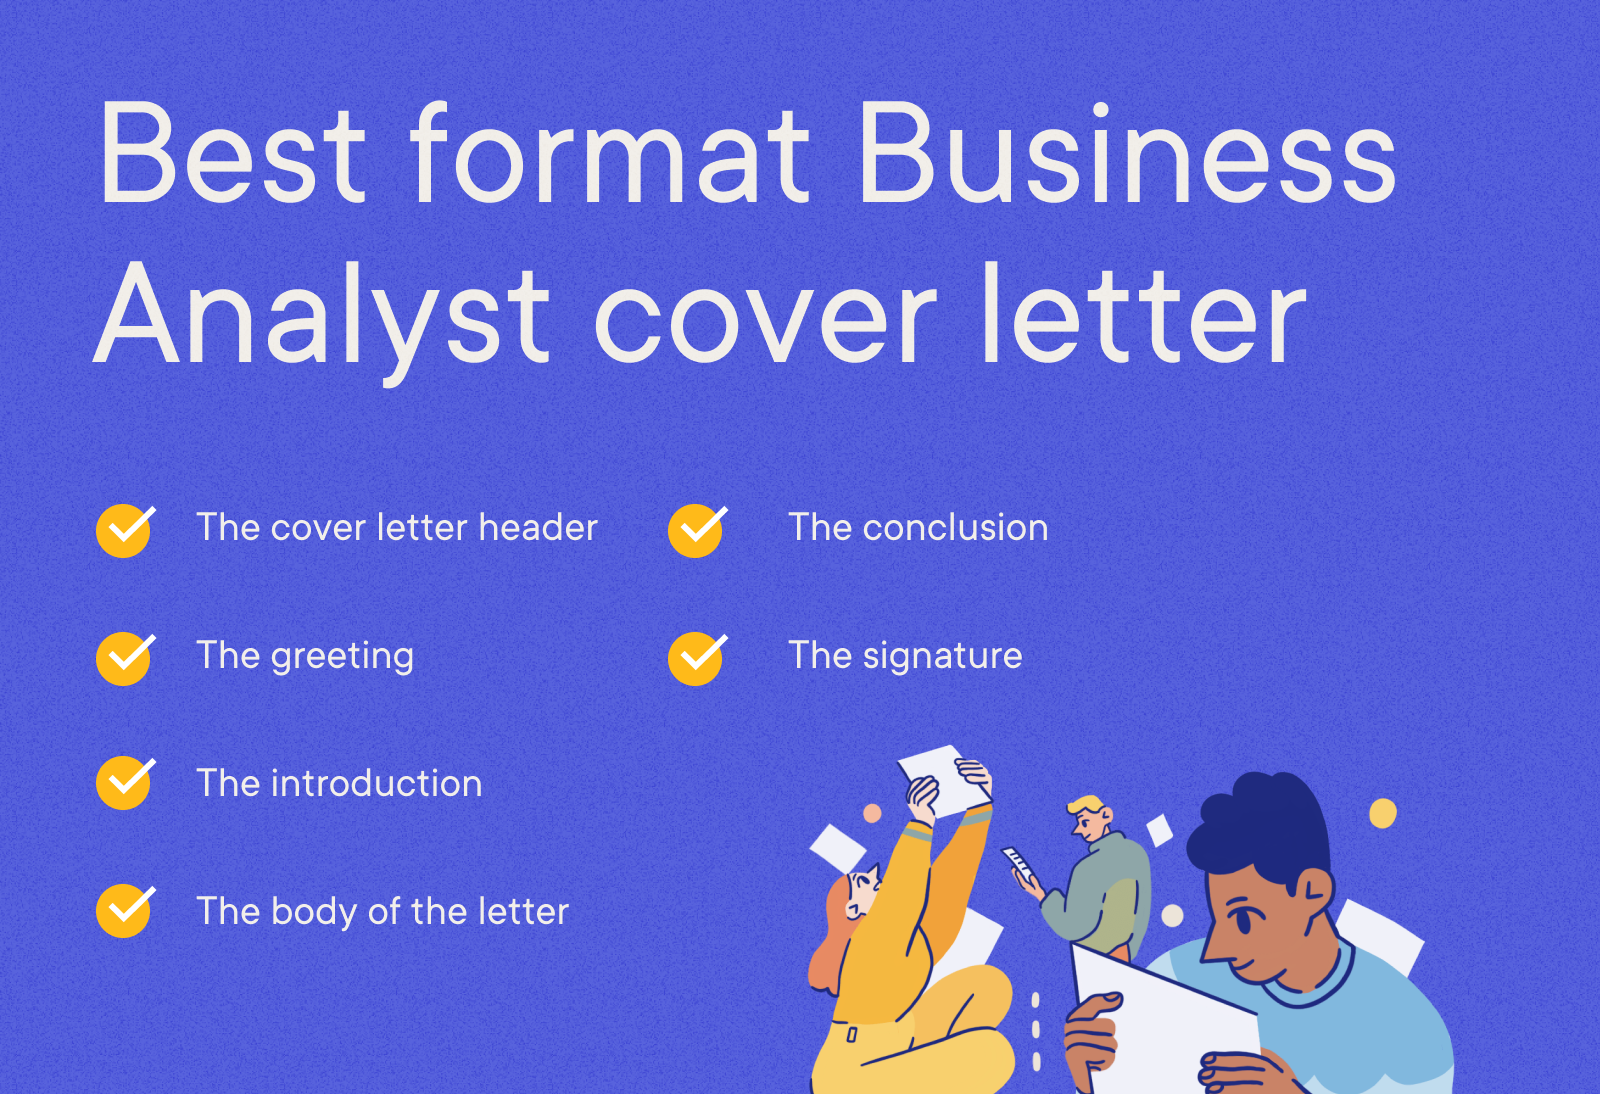 Business Analyst Cover Letter Example - Best format Business Analyst cover letter